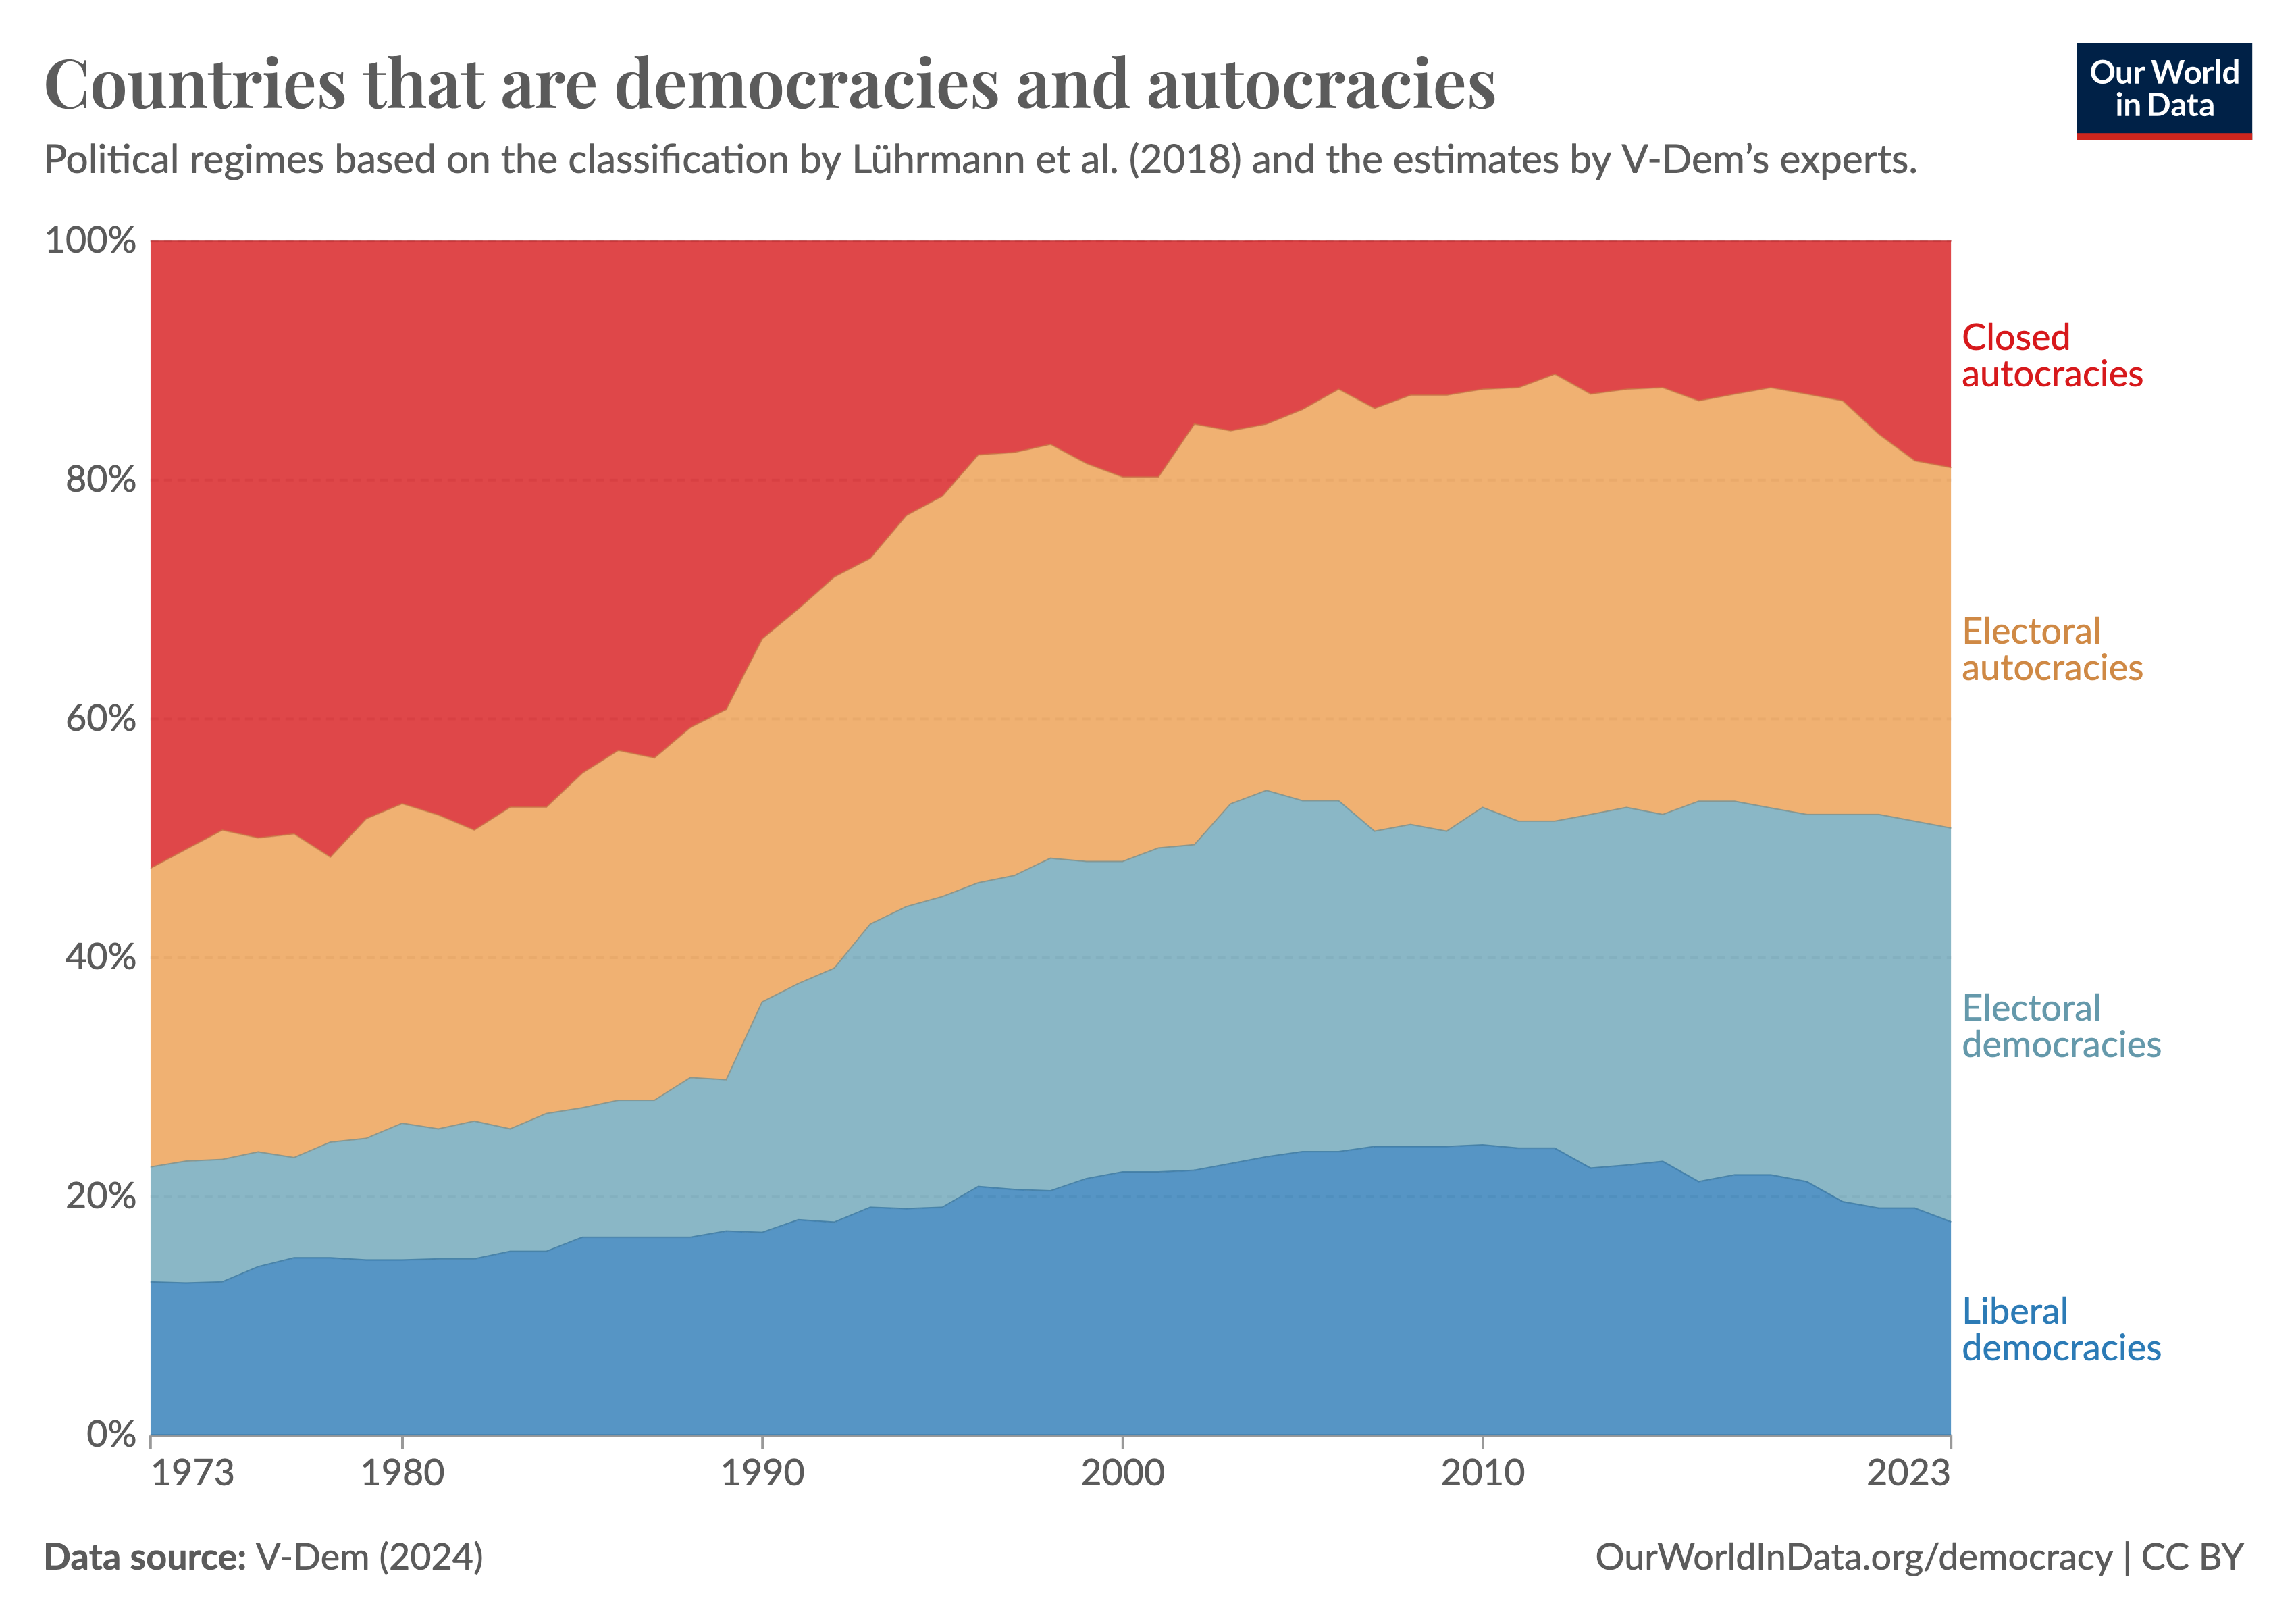 Stacked area chart of the share of countries that are democracies and autocracies between 1973 and 2023. The share of closed autocracies decreases a lot over time, but recently increases. The share of liberal democracies decreases slightly over time, but recently decreases. The share of electoral democracies increases a lot and recently stagnates. The share of electoral autocracies increases over time.